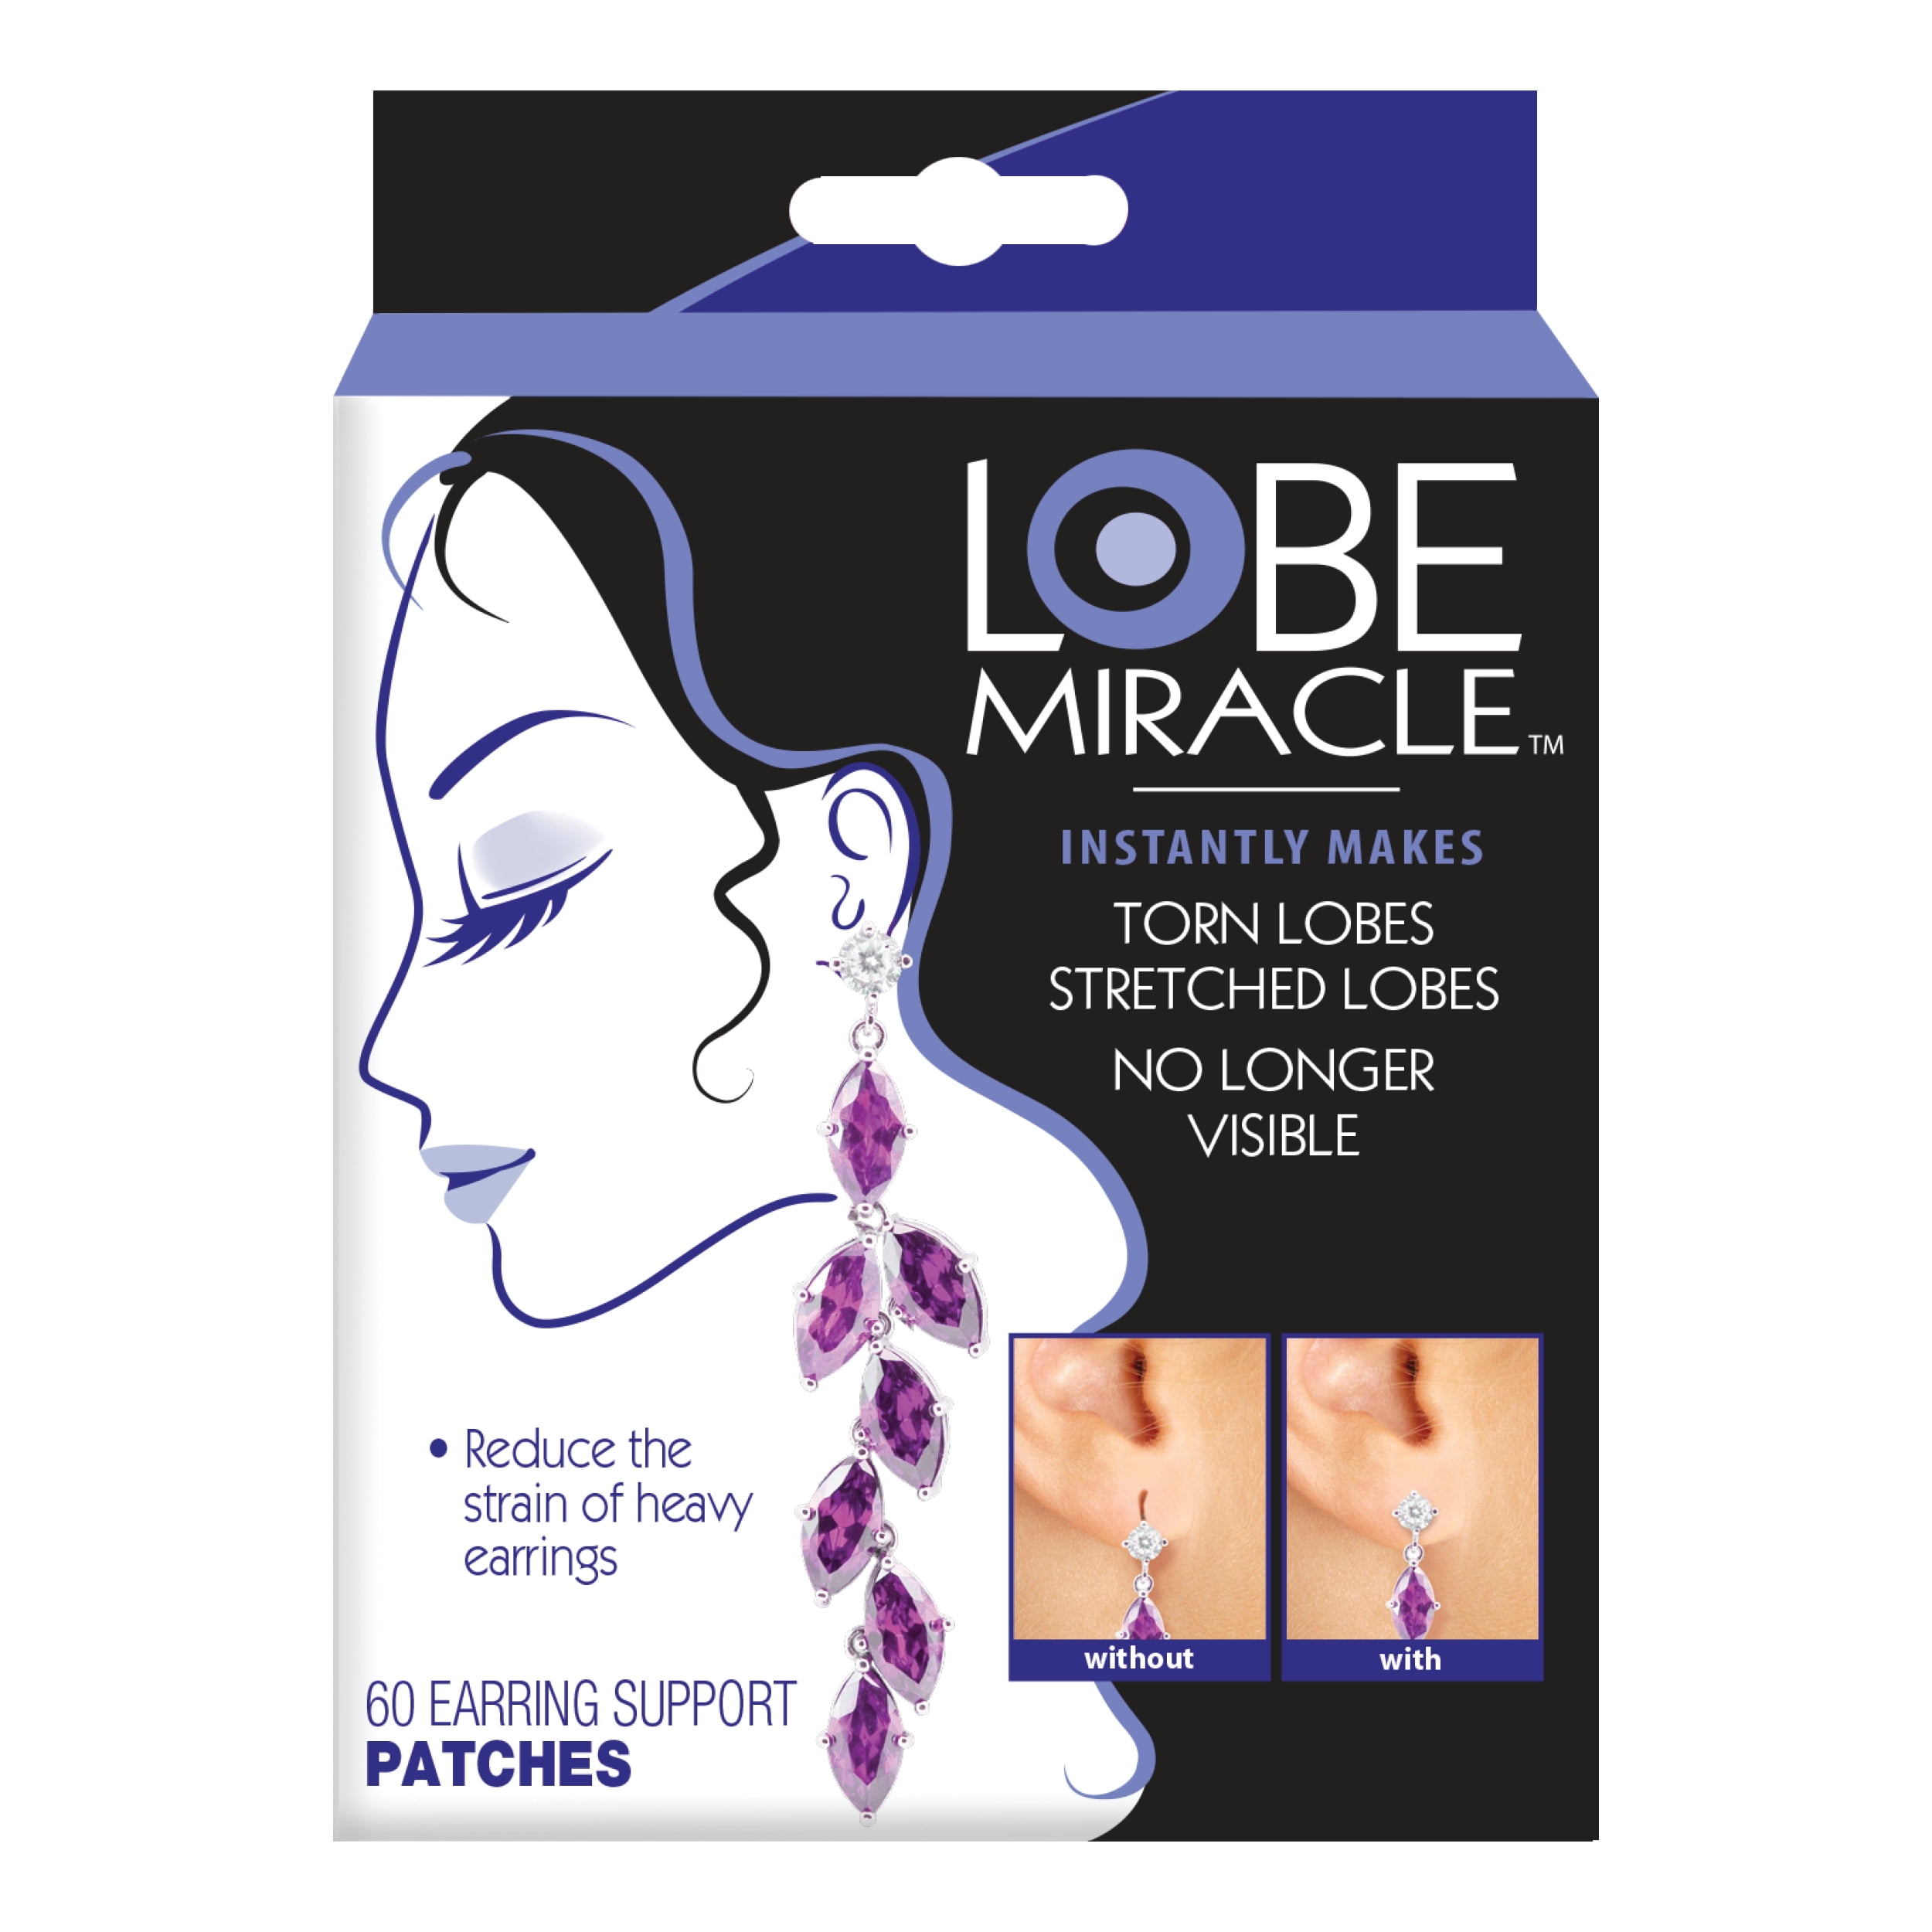 Lobe Wonder 300 Invisible Earring Ear-Lobe Support Patches - Provides  Relief for